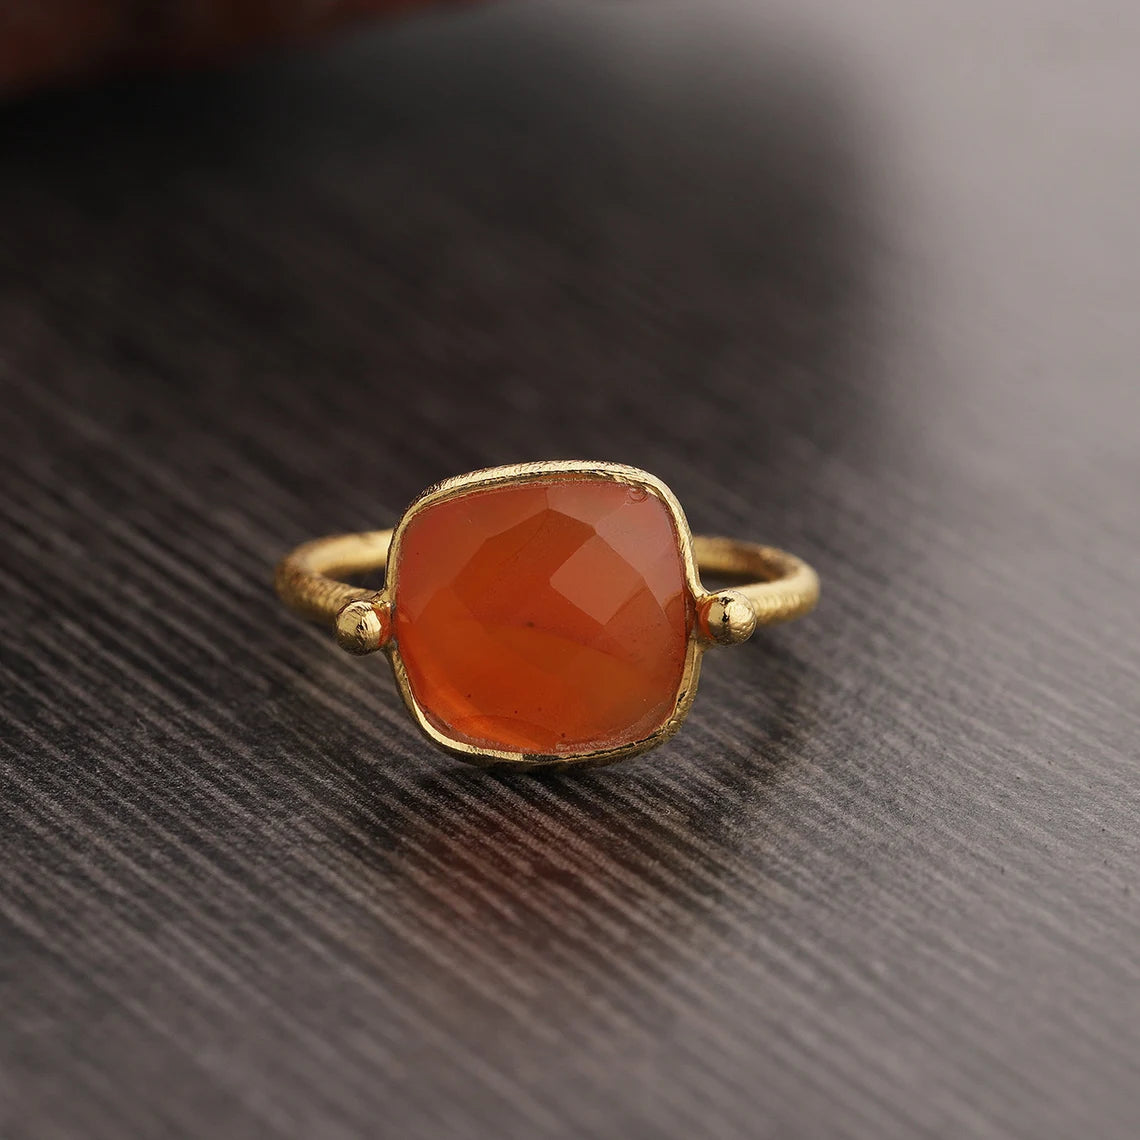 Natural Carnelian Ring, Sterling Silver Ring, Gold Plated Ring, Cushion Ring, Handmade Ring, Statement Ring, August Birthstone Ring